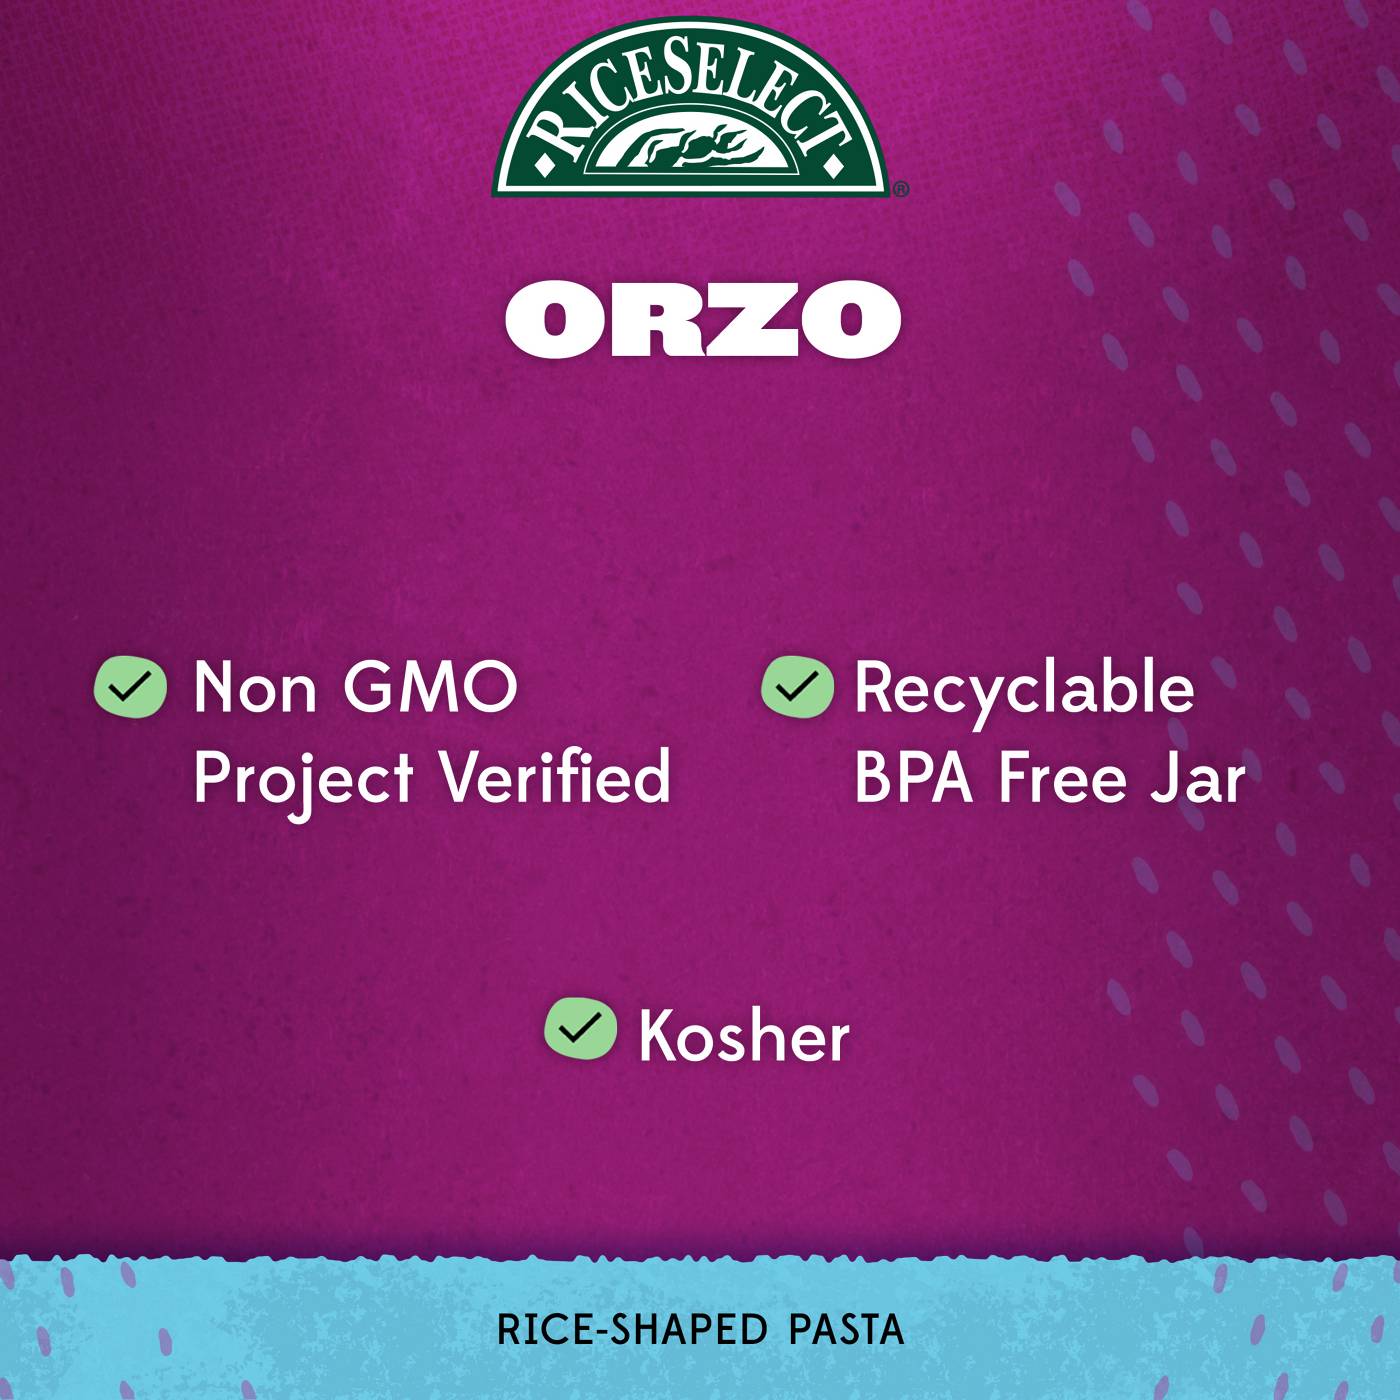 RiceSelect Original Orzo; image 5 of 6